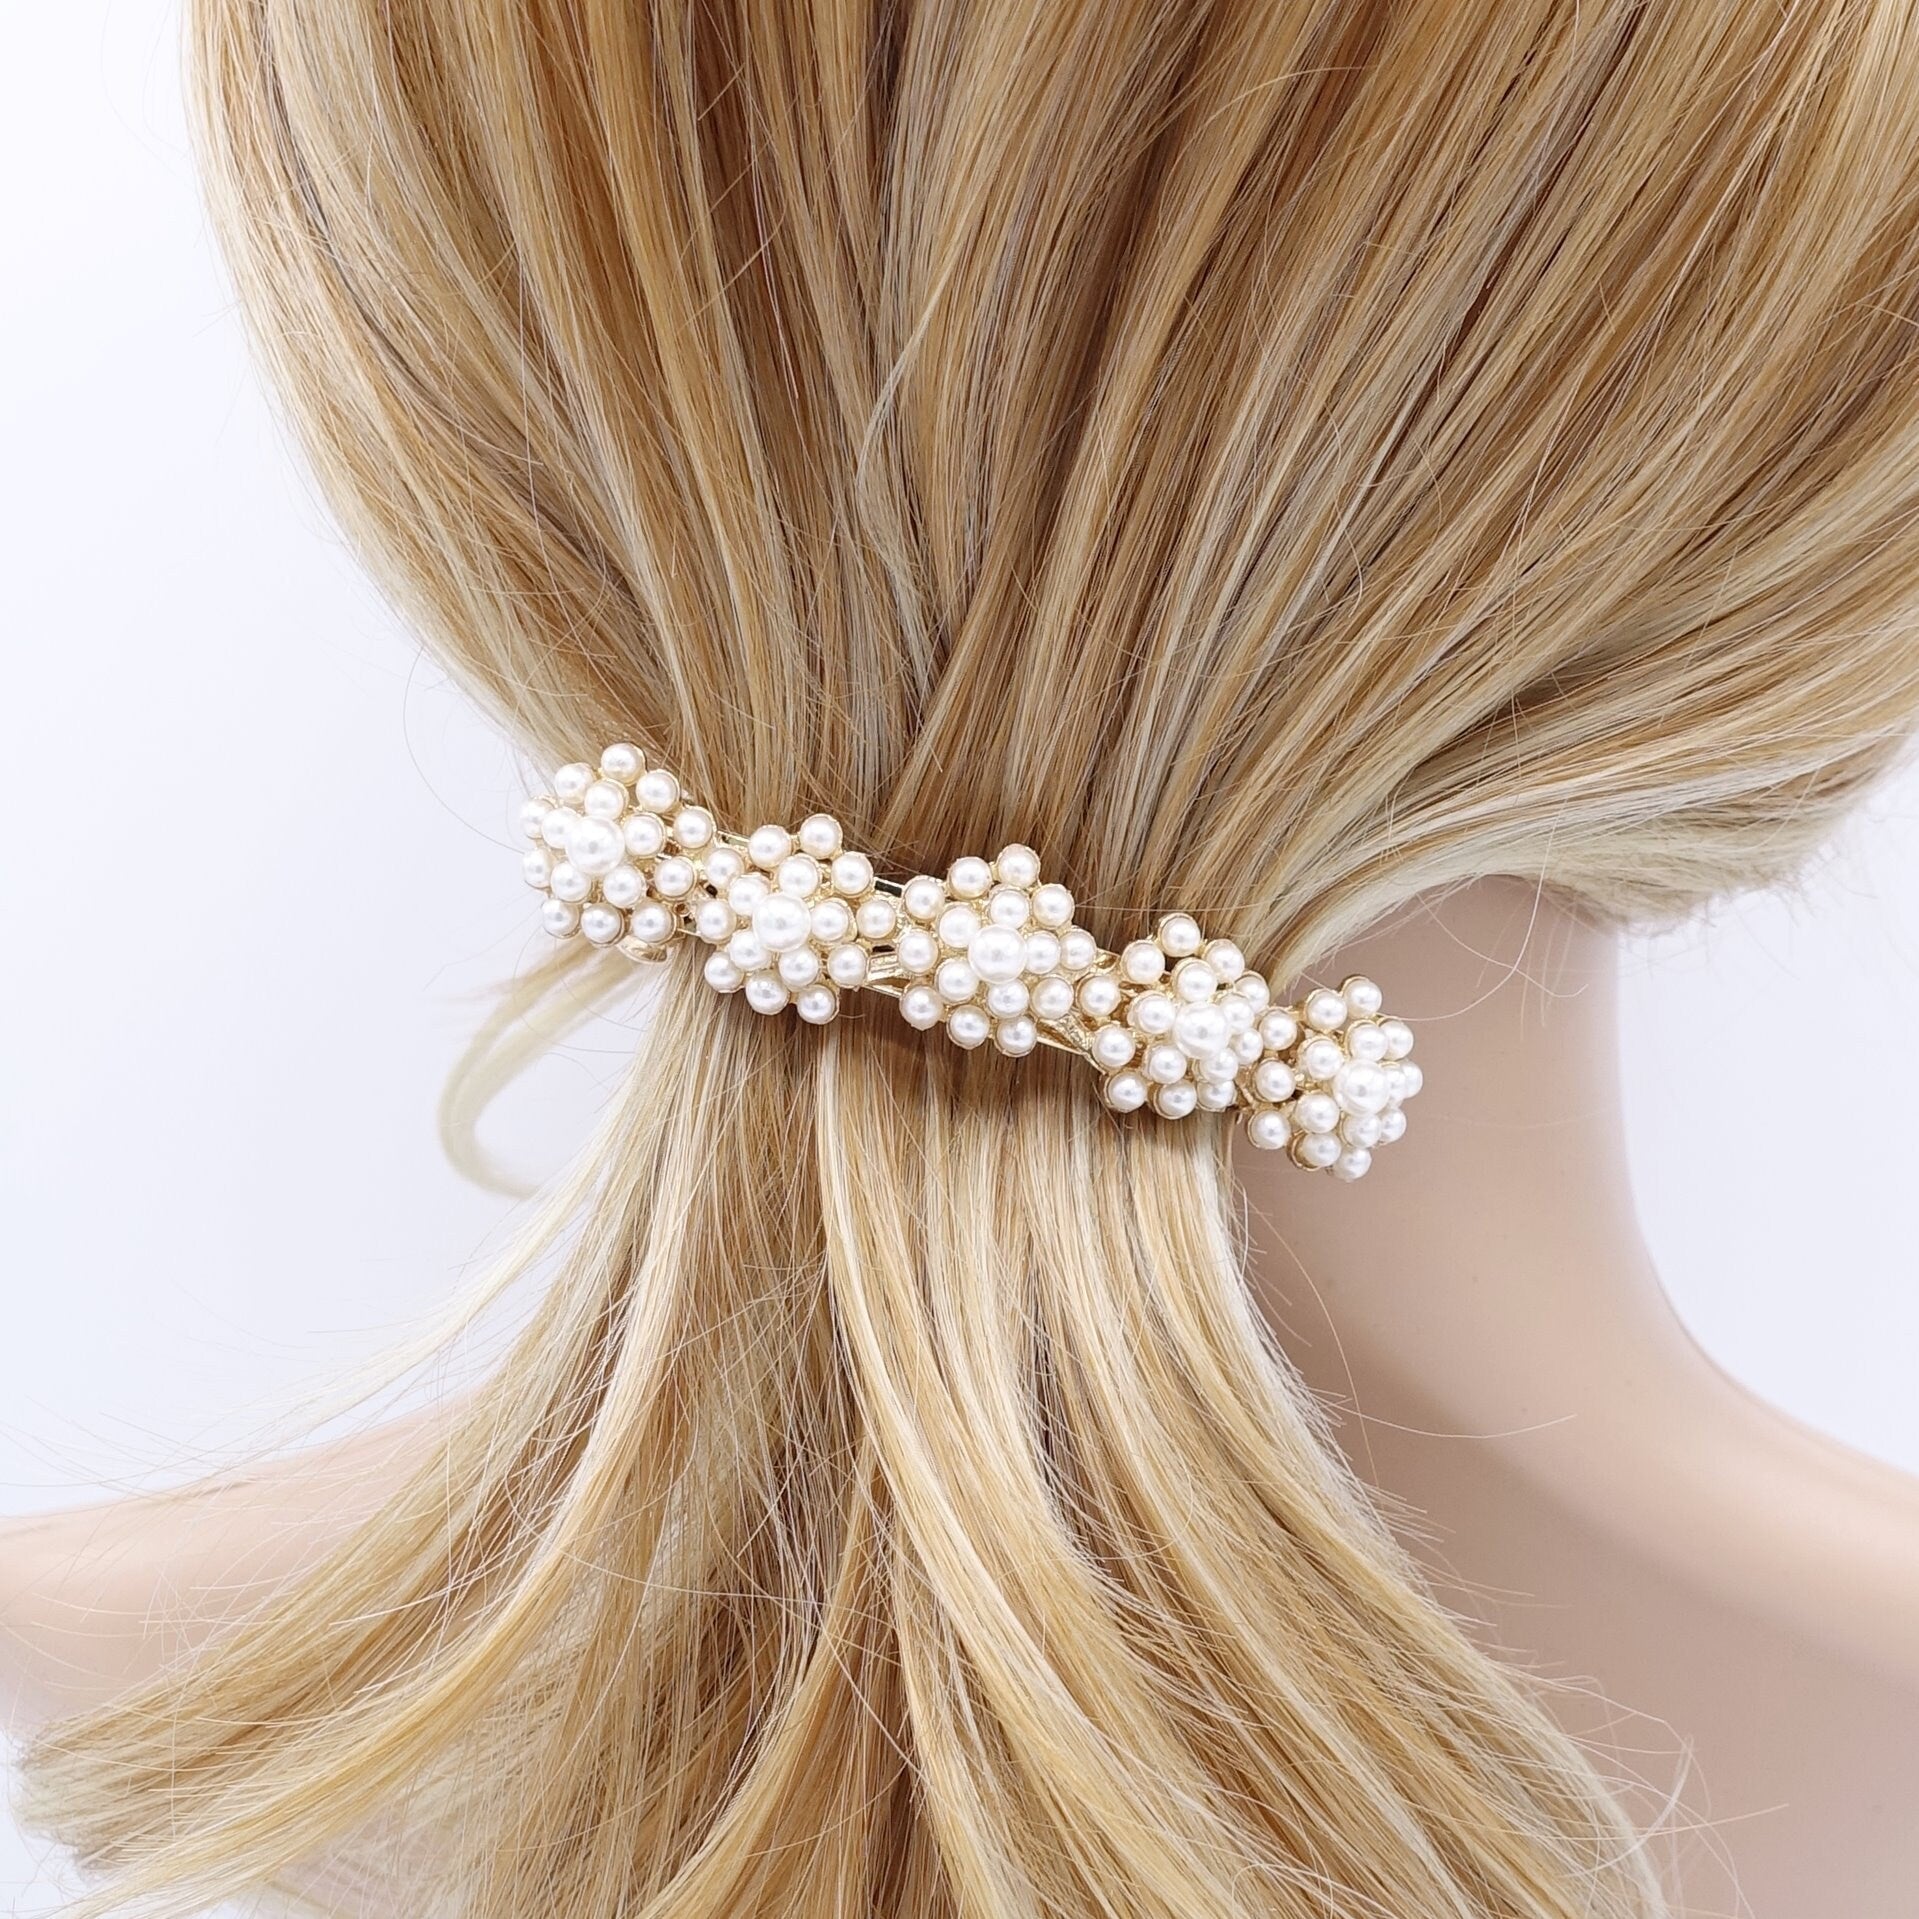 veryshine.com Barrette (Bow) Pearl only tiny pearl ball flower french hair barrette women hair accessory